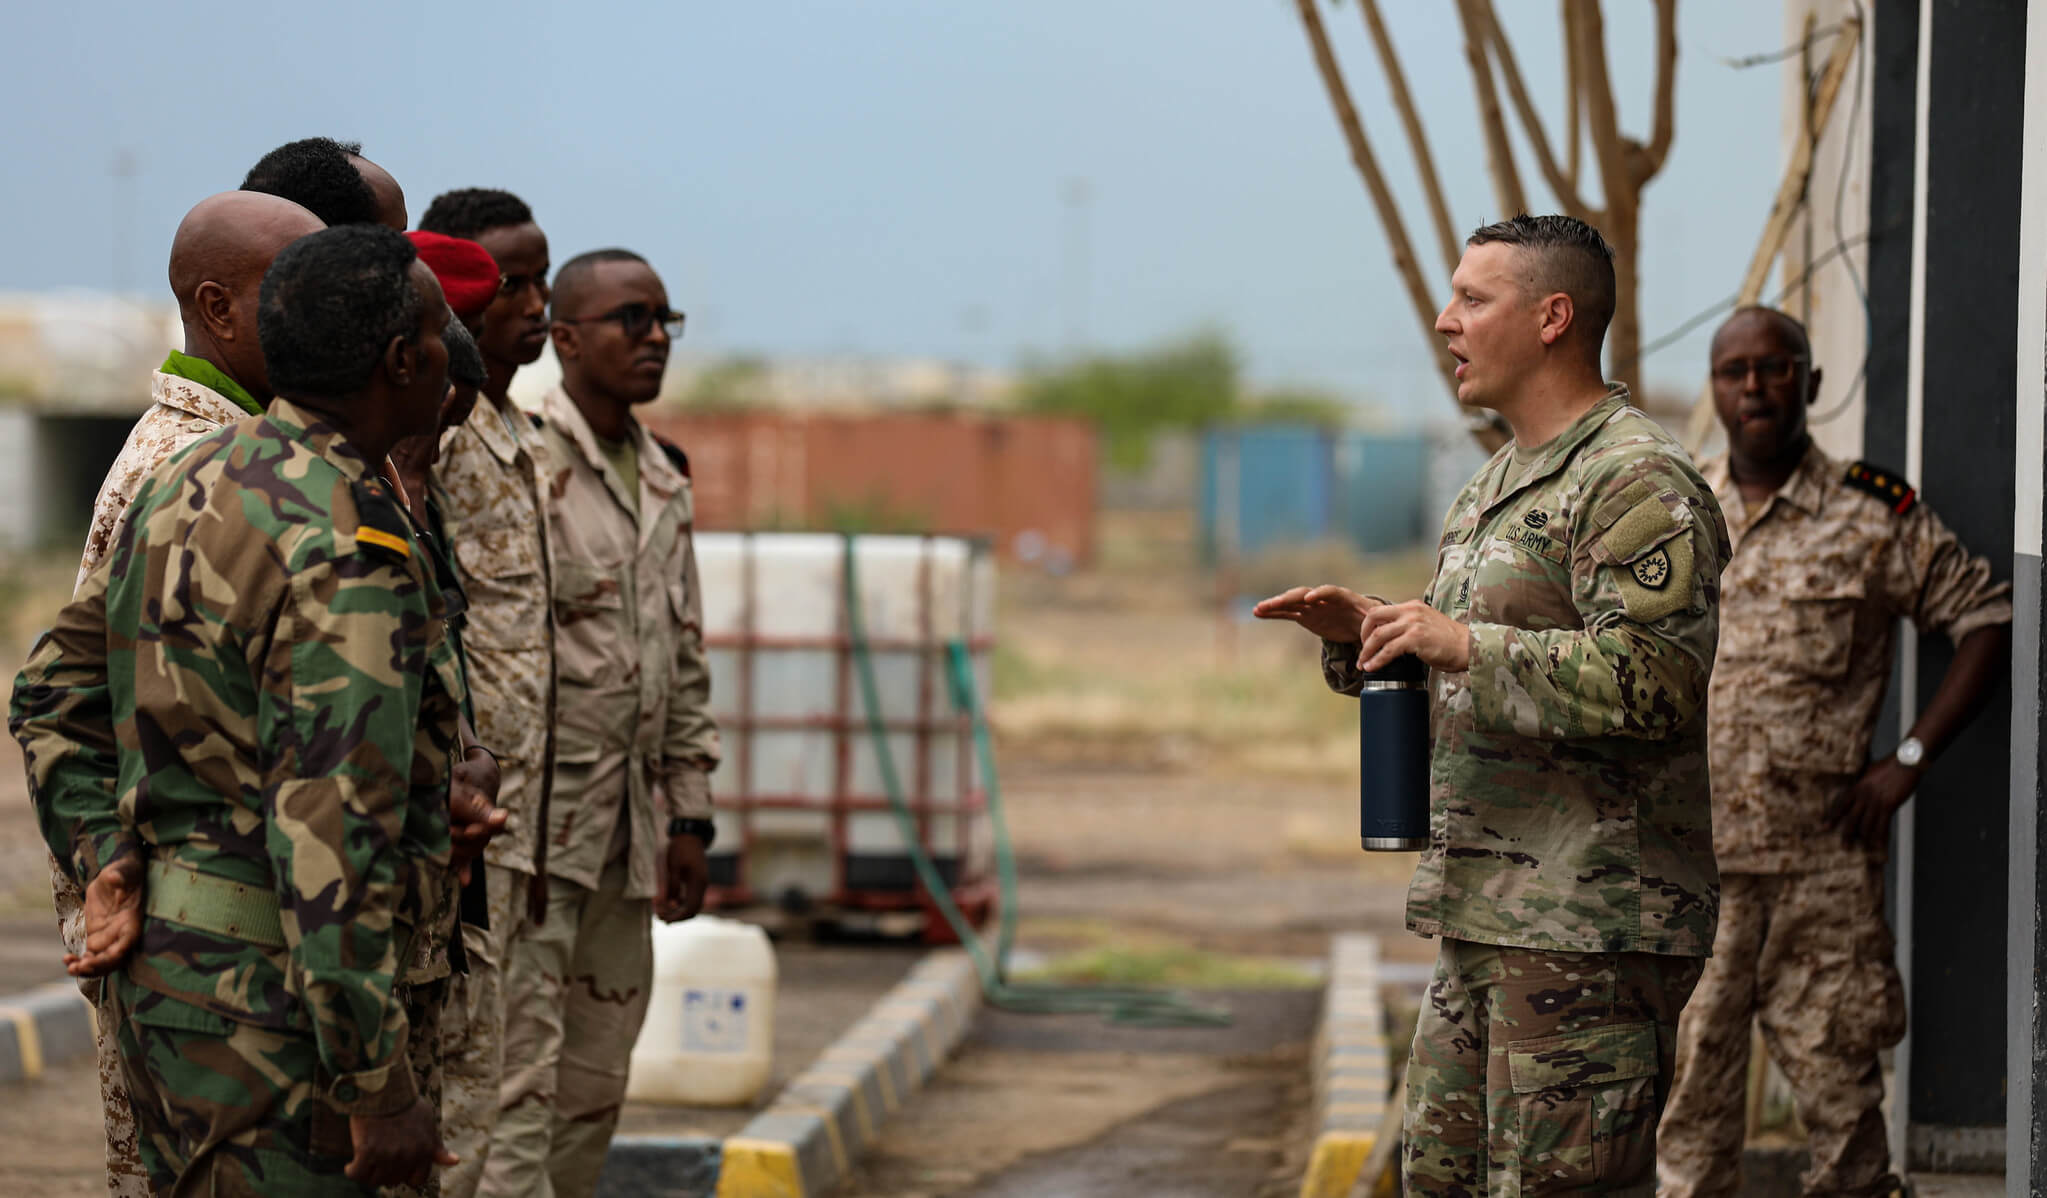 Kentucky National Guard Engineers traveled  to Camp Lemonier, Djibouti in August 2021 to conduct training with the Djiboutian military. © Kentucky National Guard PA